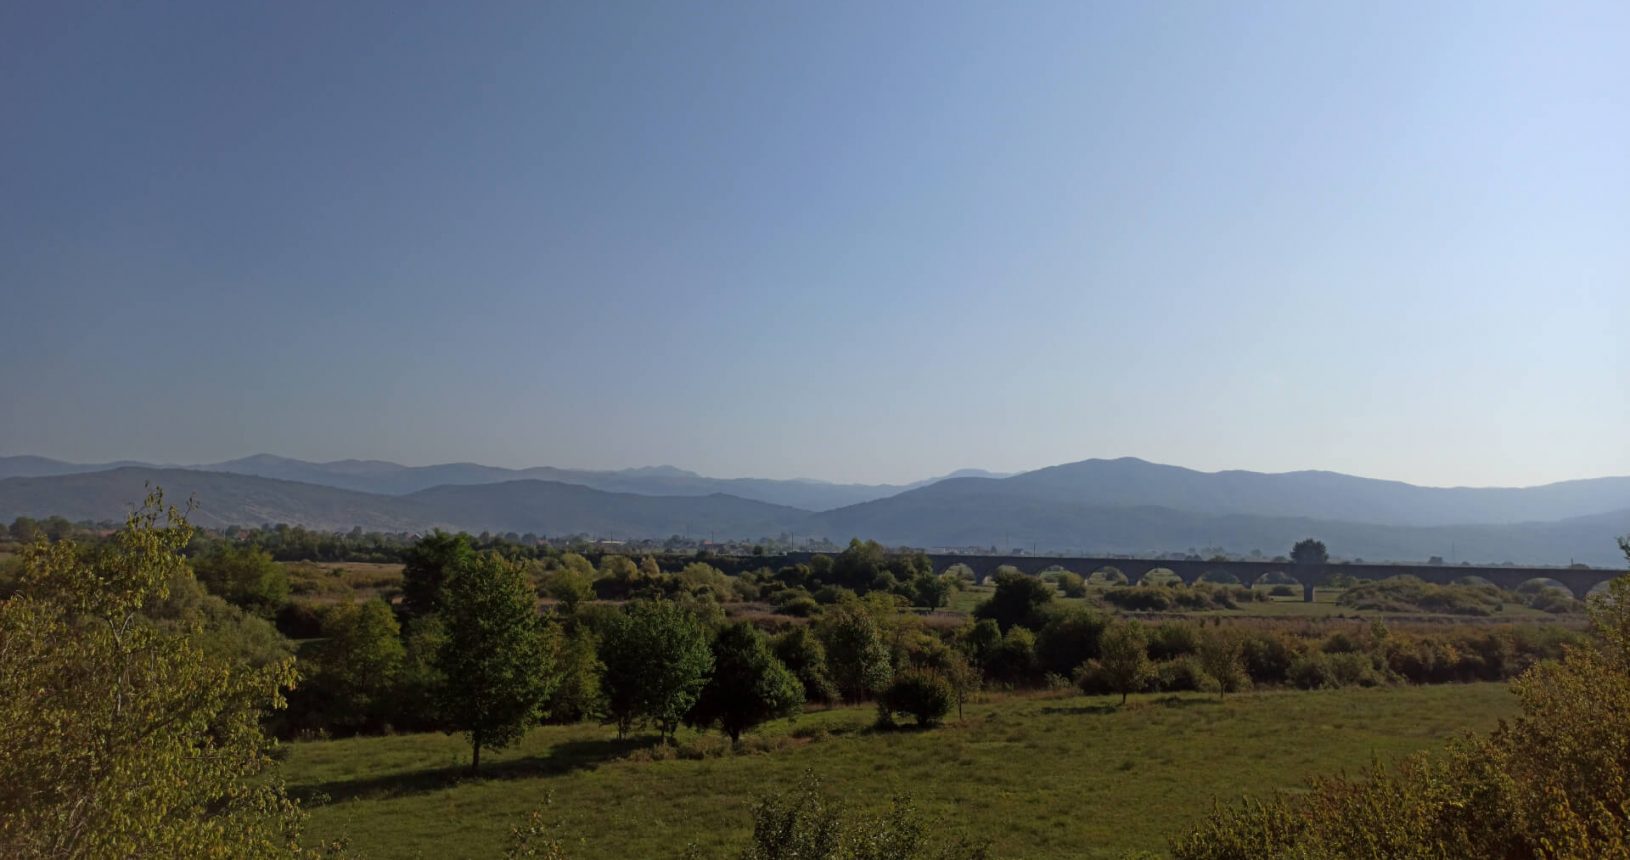 The view to Niksic